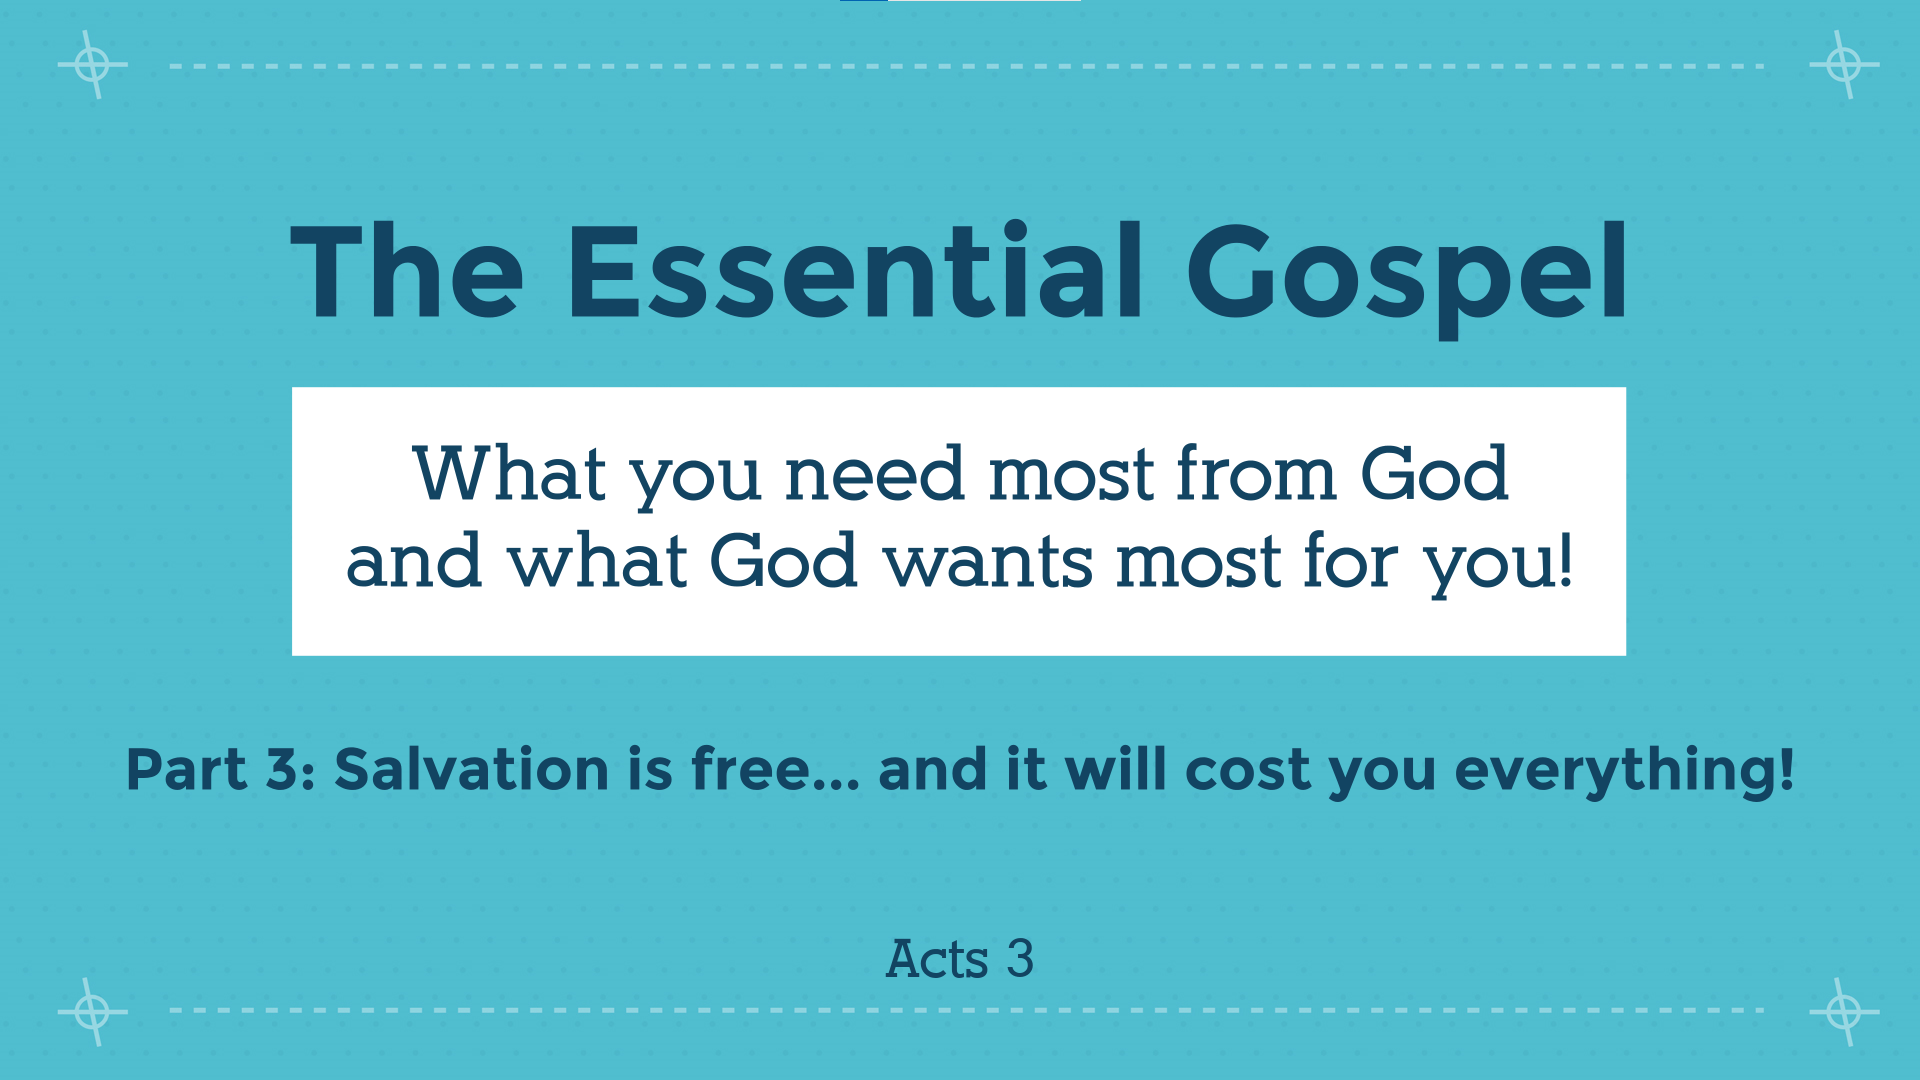 The Essential Gospel 3: Salvation is free... and will cost you everything!